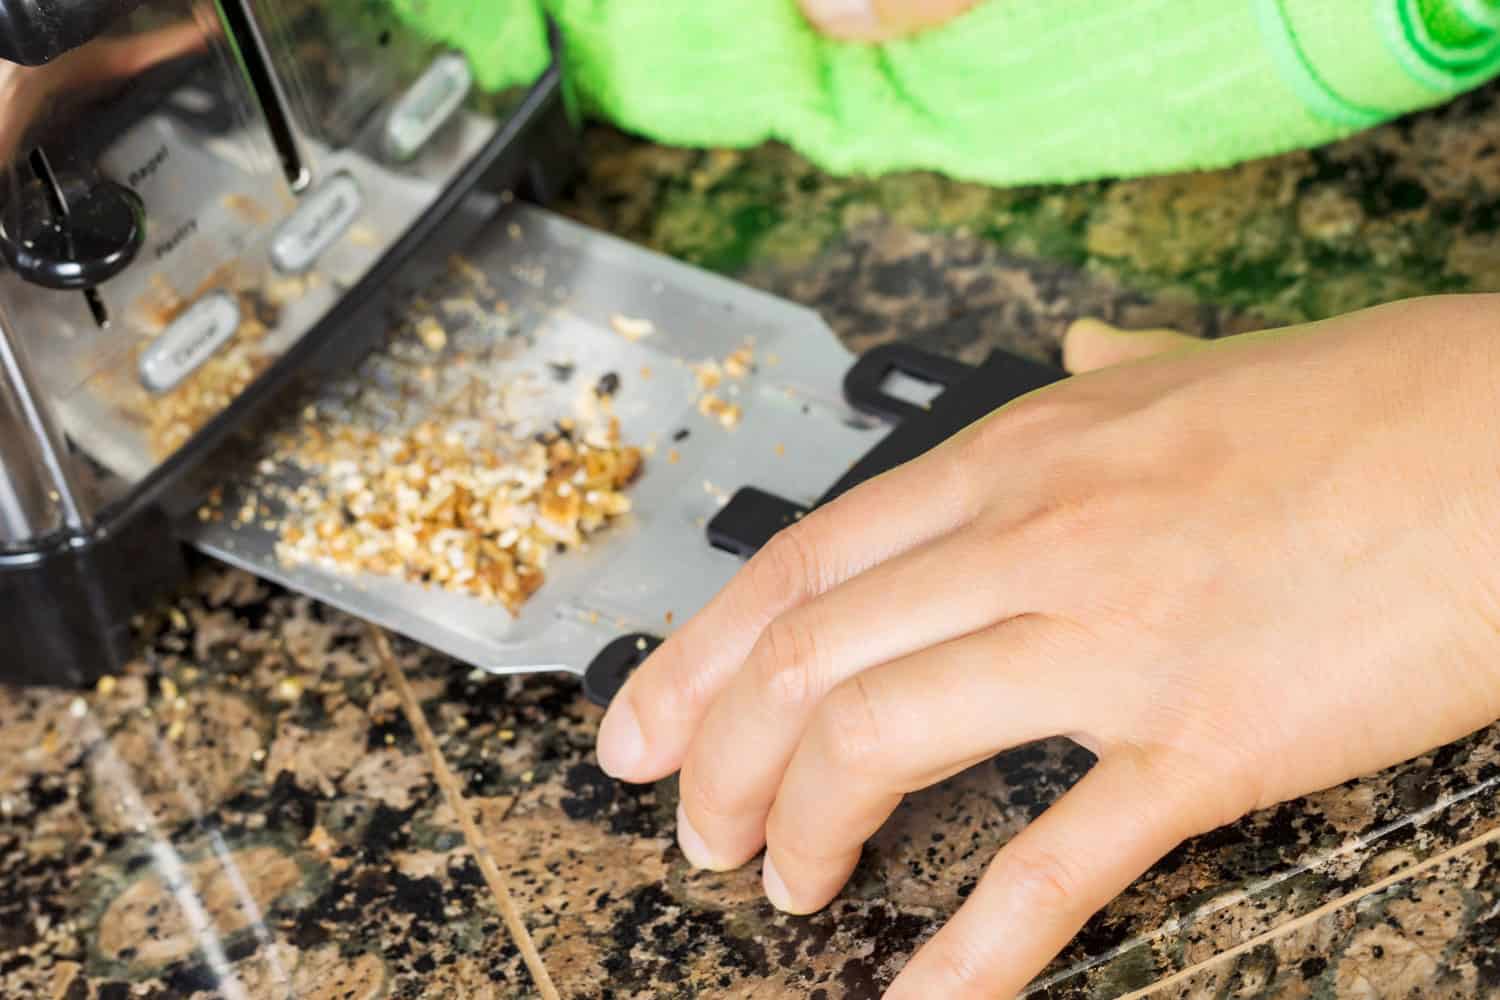 A woman removing the bread crumb tray of a toaster